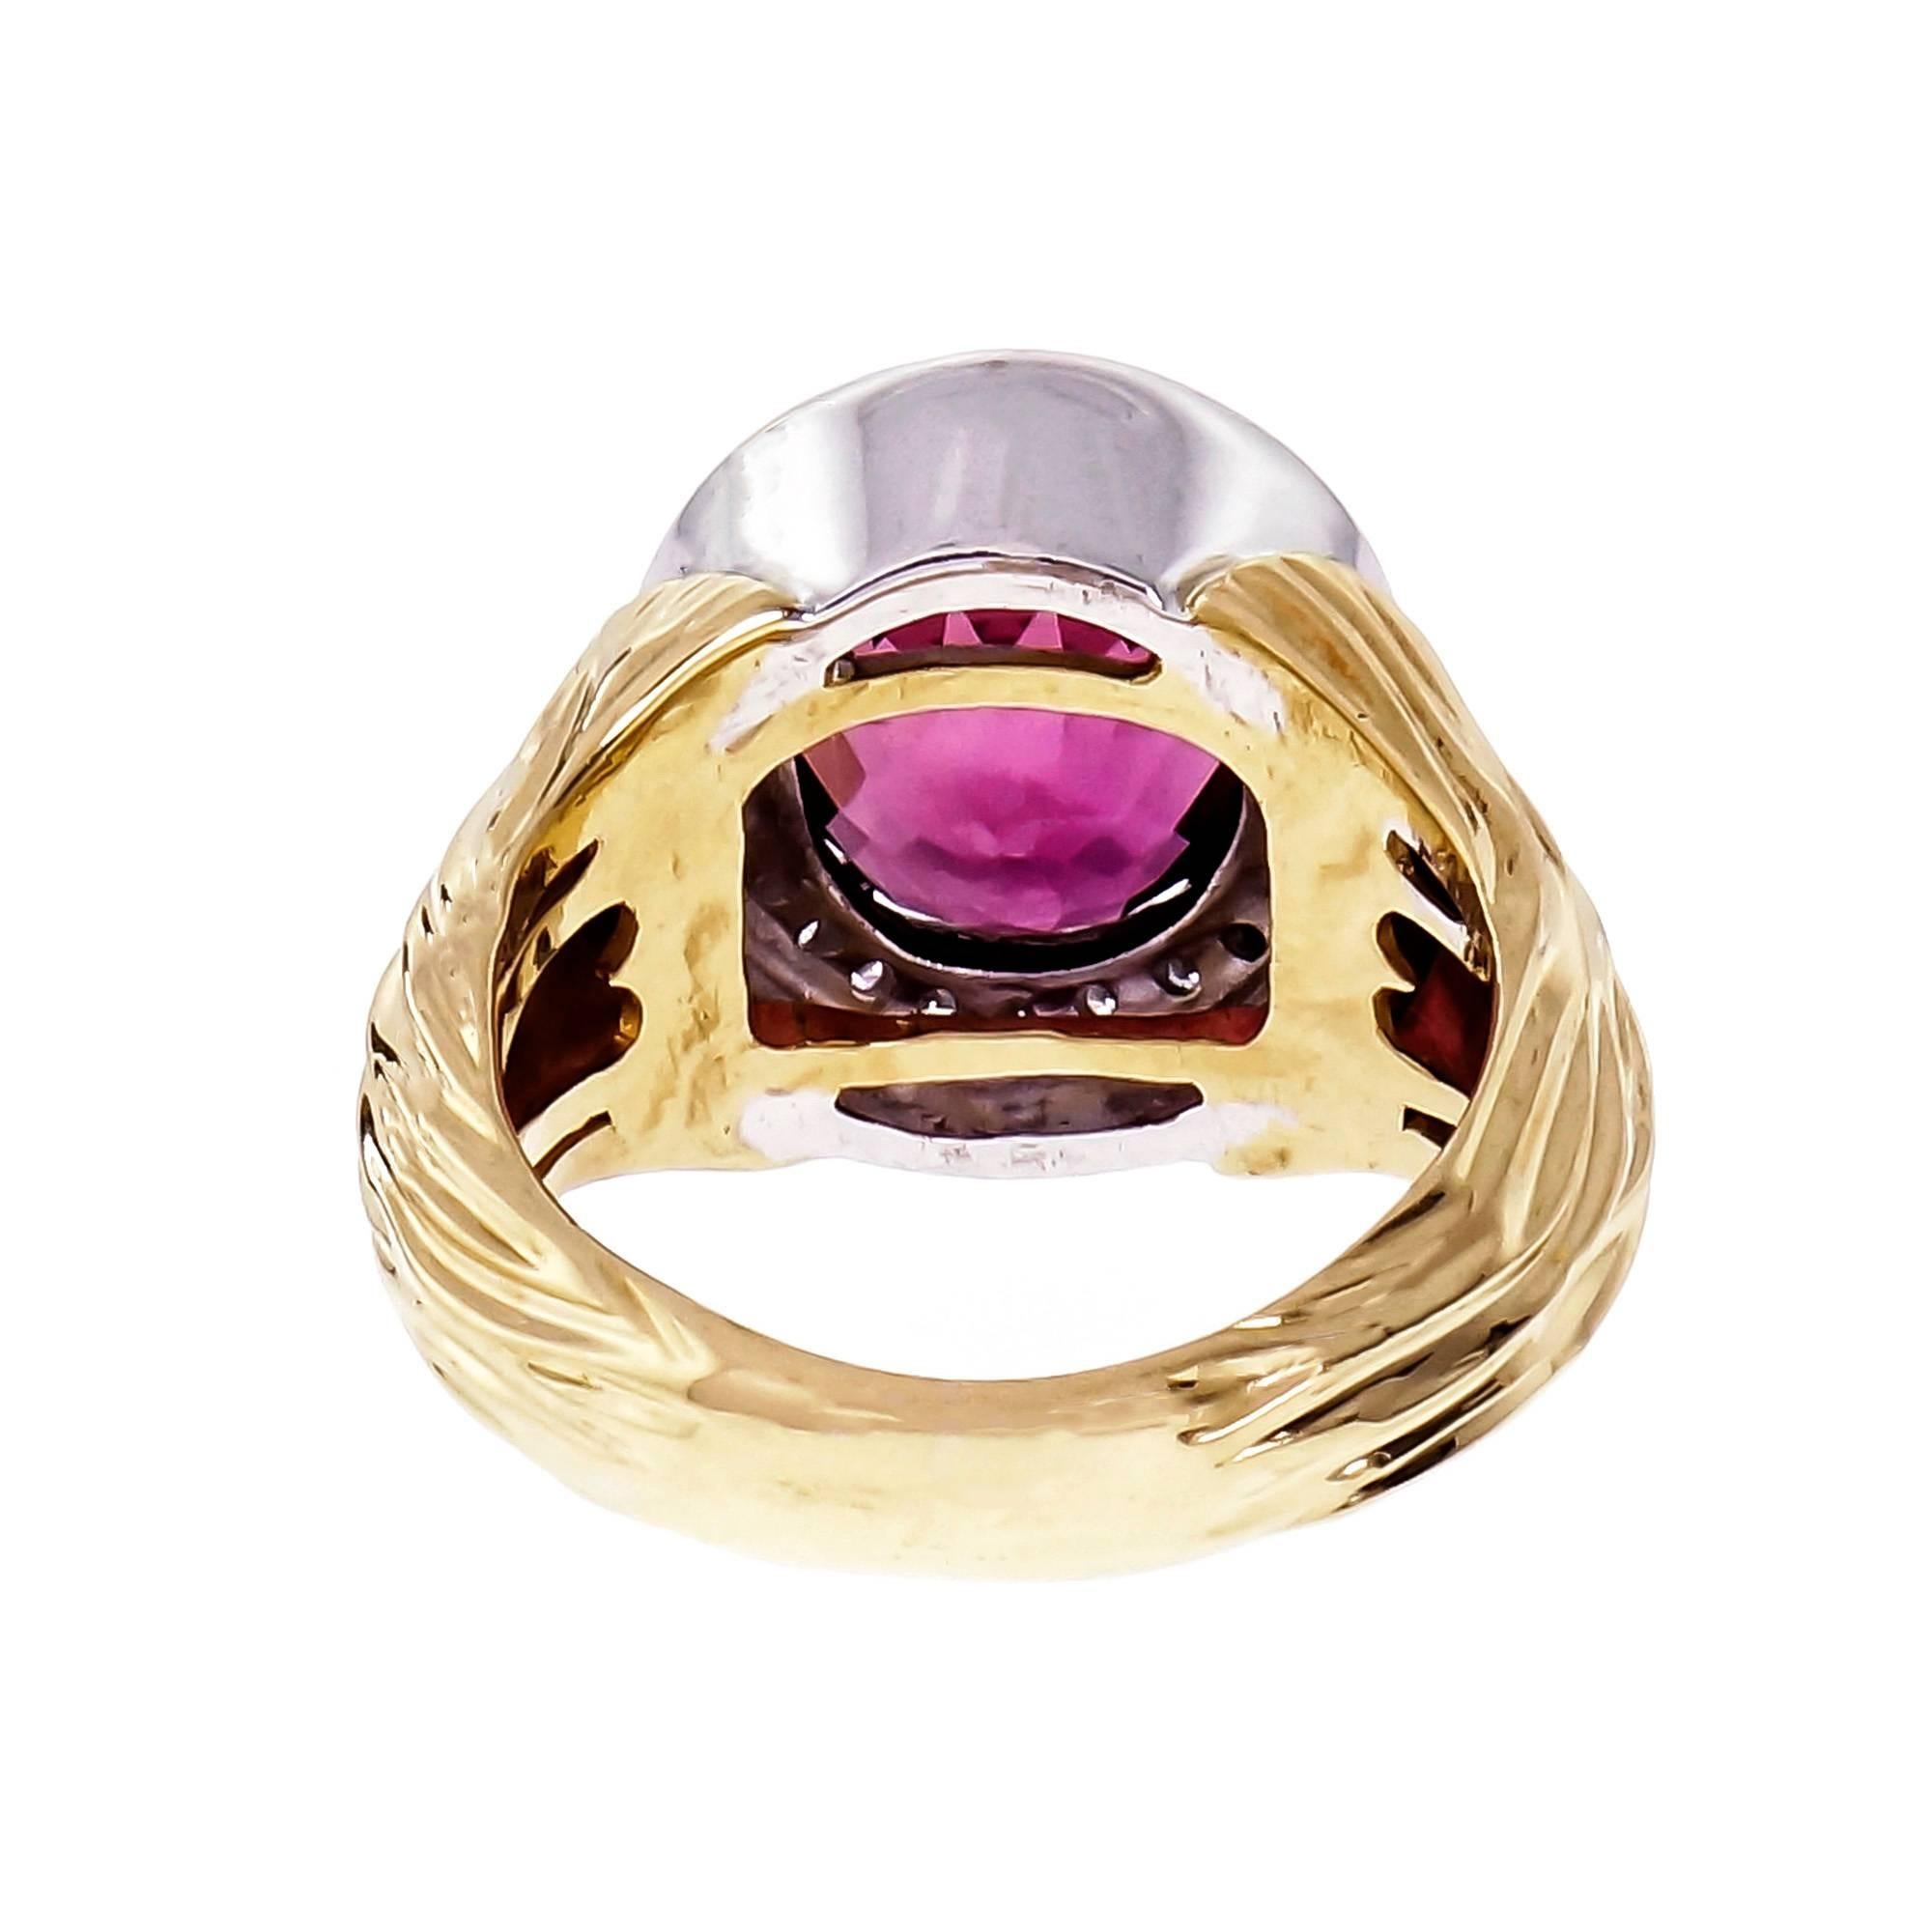 3.54 Carat Oval Faceted Pink Tourmaline Diamond Halo Gold Cocktail Ring In Good Condition For Sale In Stamford, CT